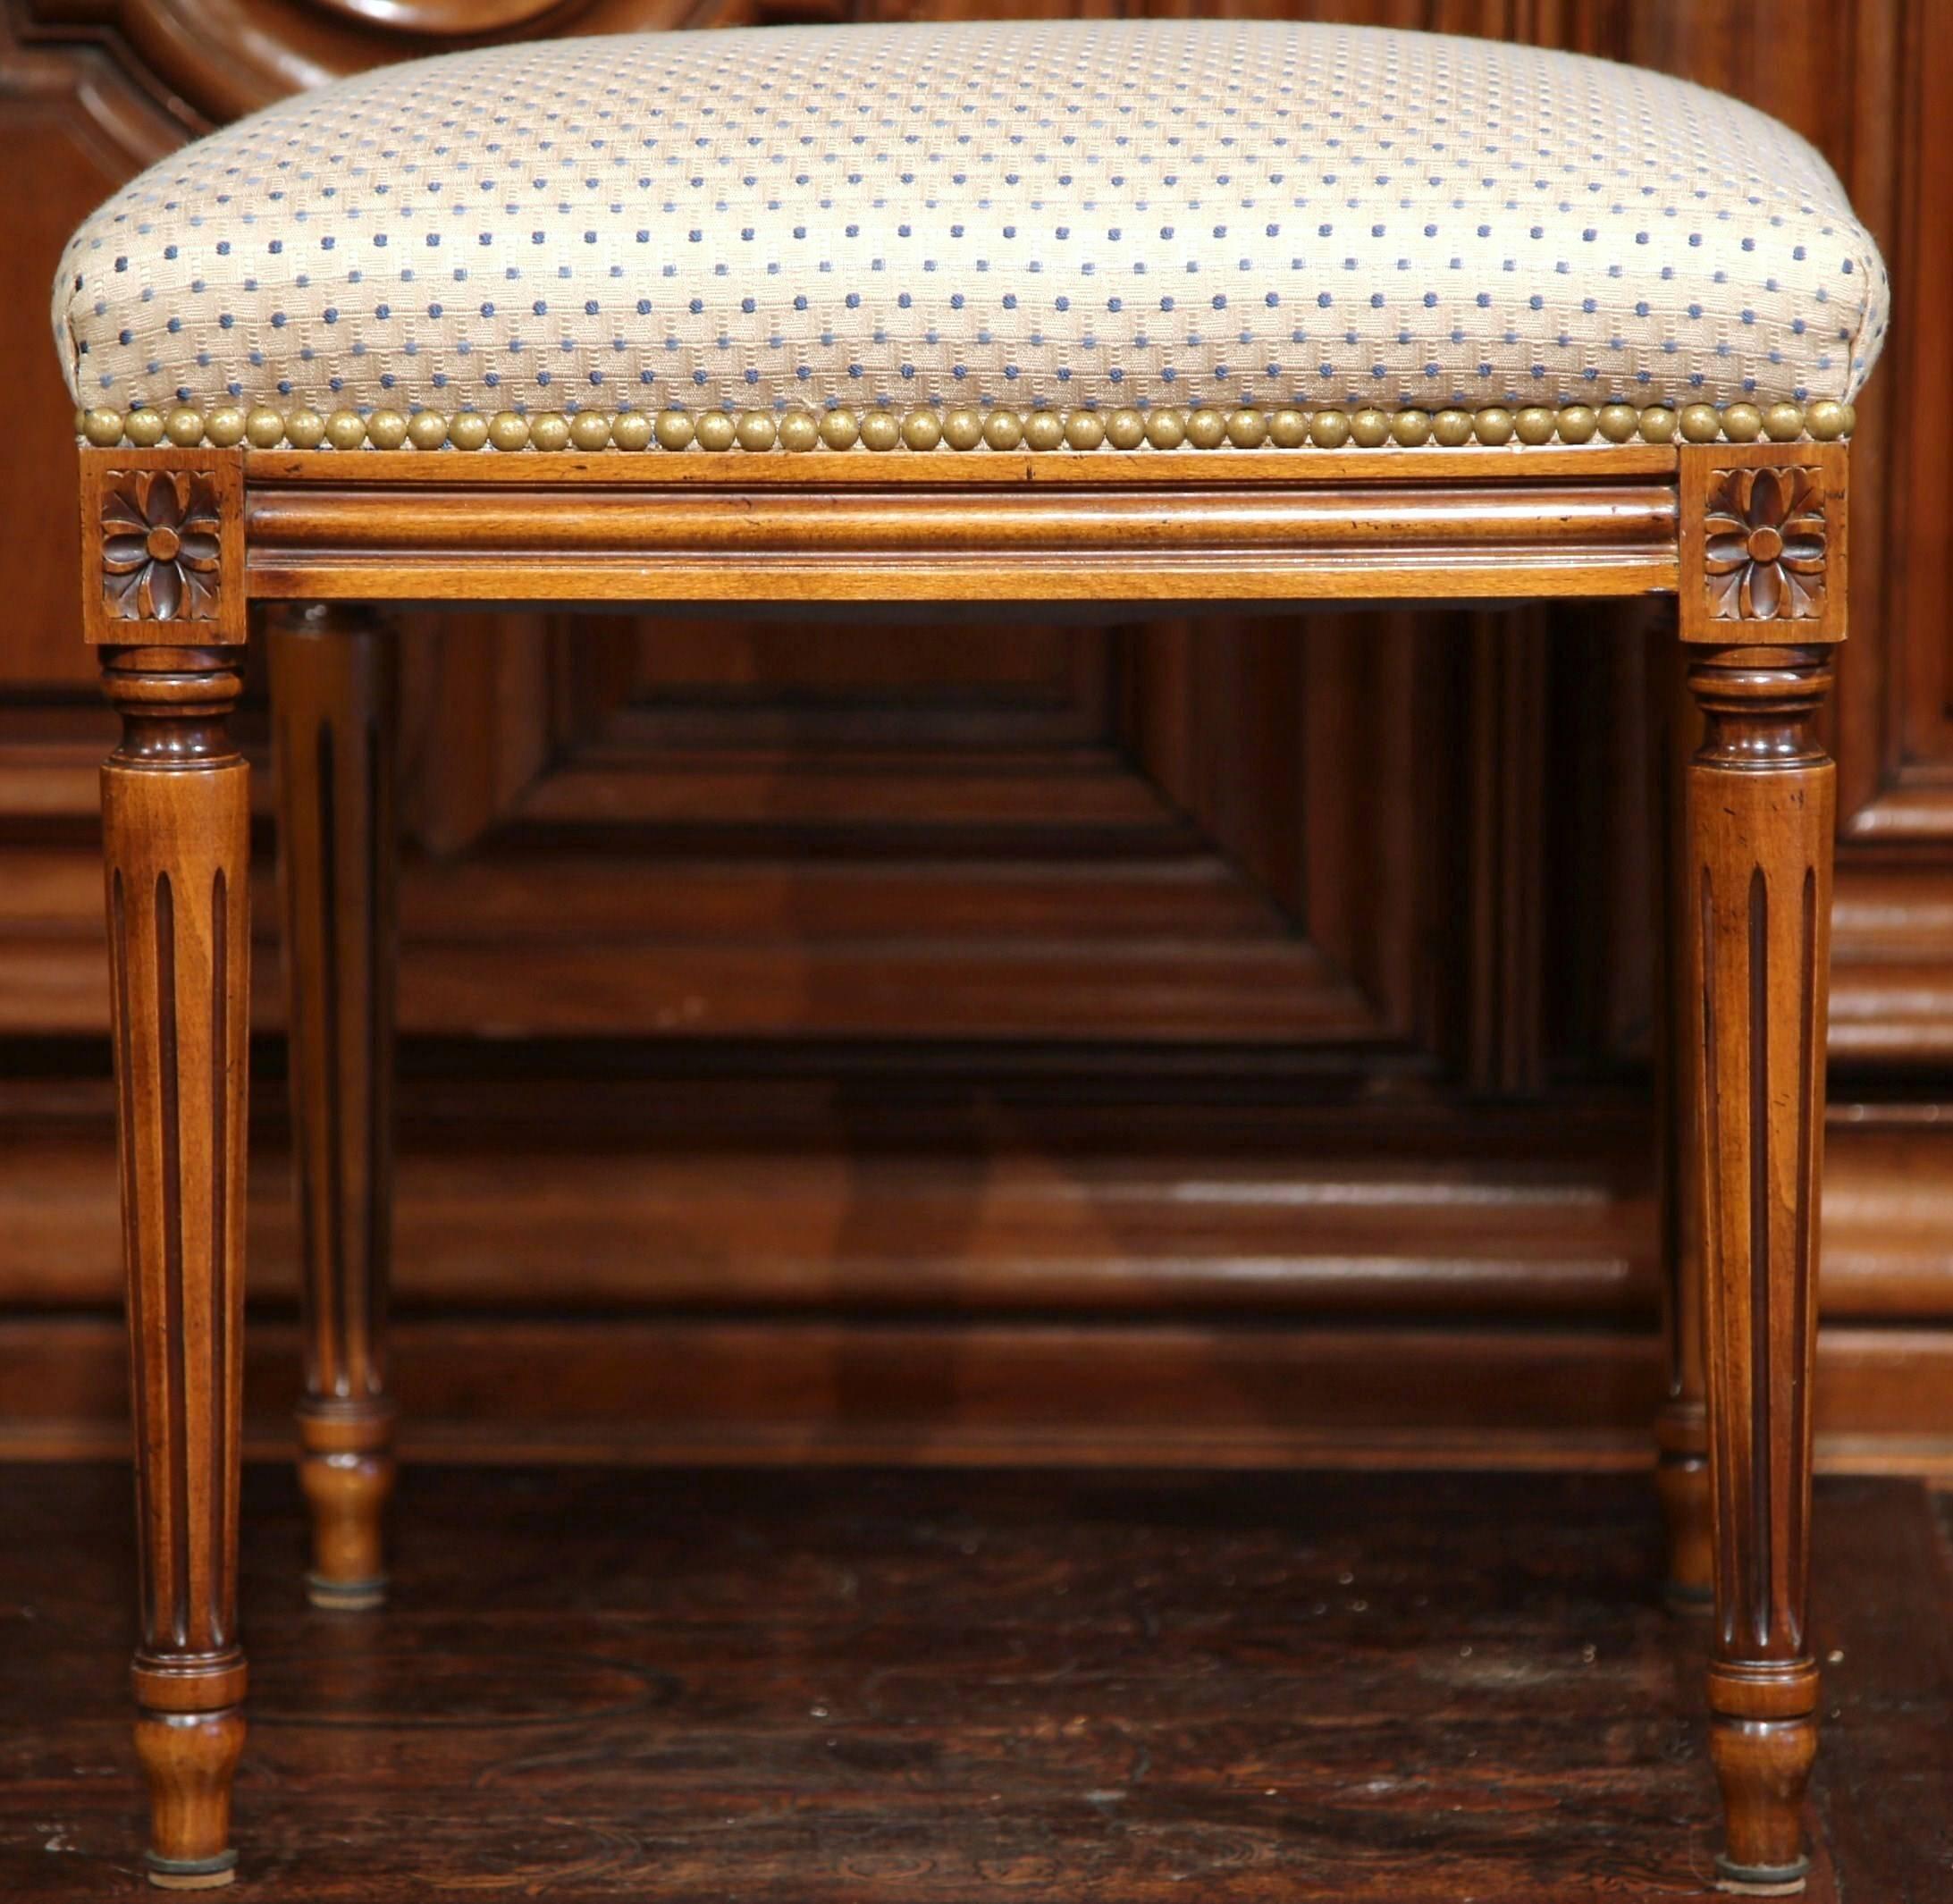 This elegant fruitwood stool was carved in France, circa 1920. The small seat has four tapered legs with delicate flower medallions in each corner. The seat has been reupholstered with an elegant white fabric with a subtle dot design. Incorporate